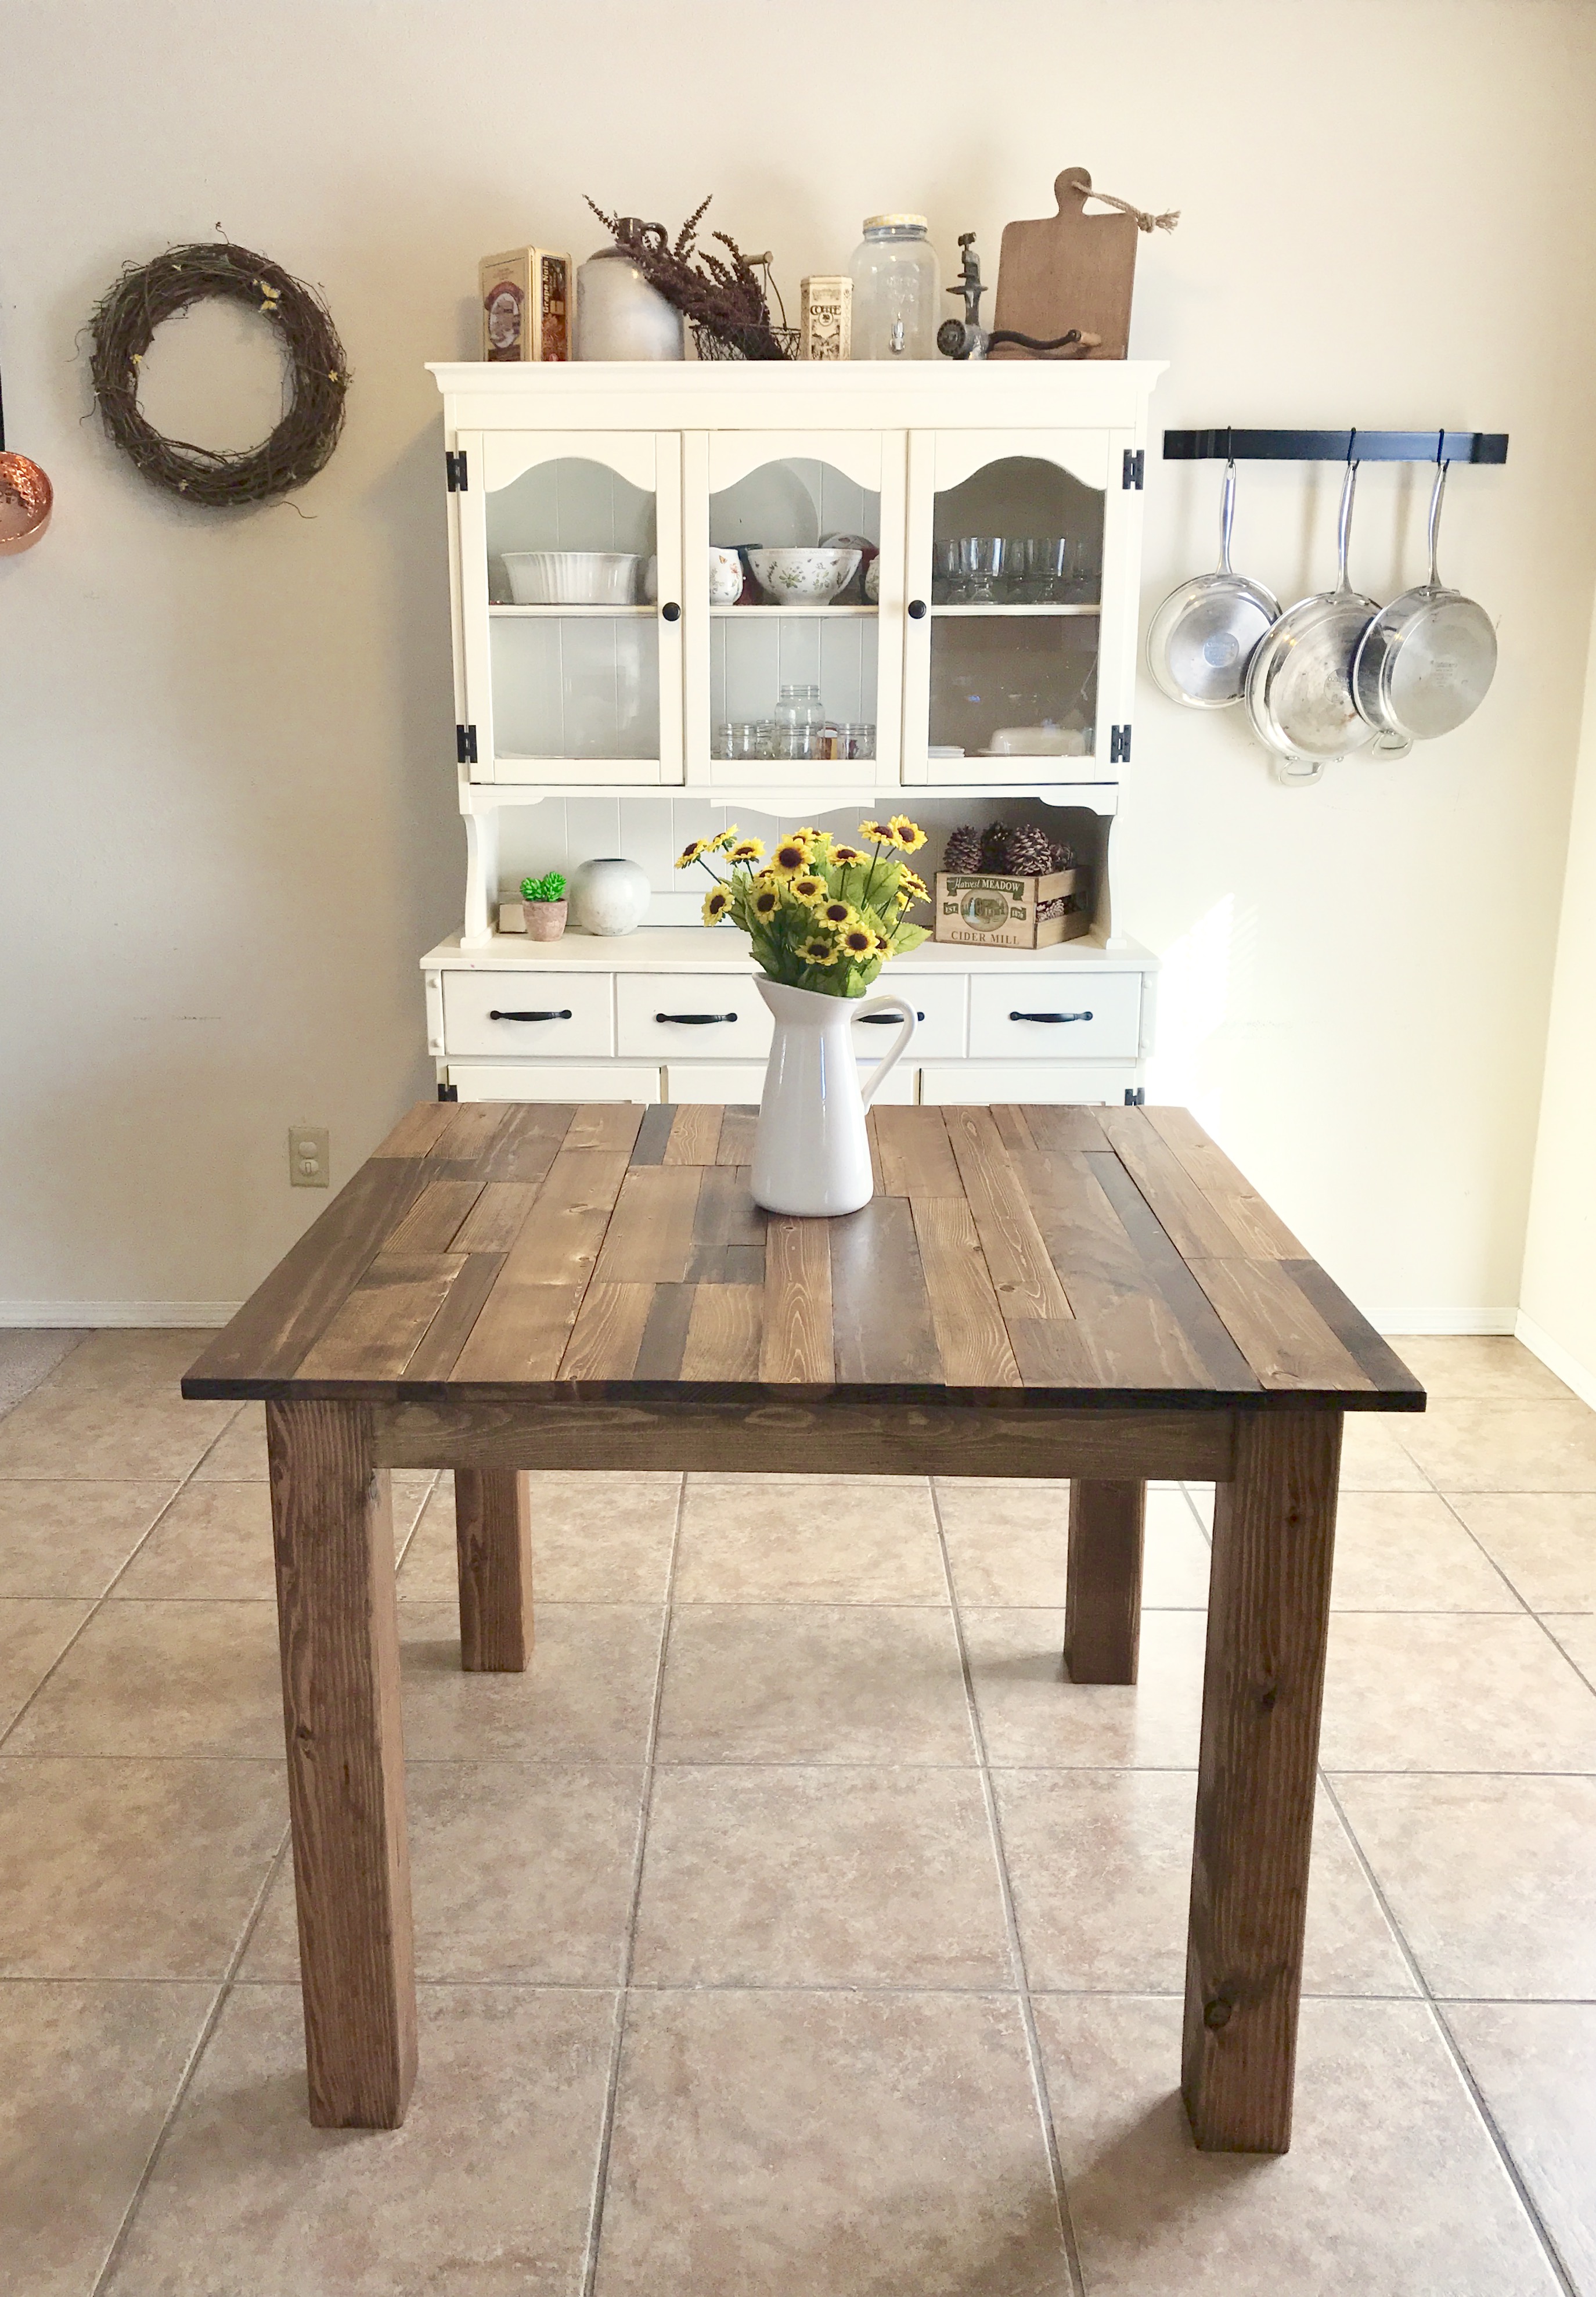 Ana White | Square Farmhouse Table - DIY Projects